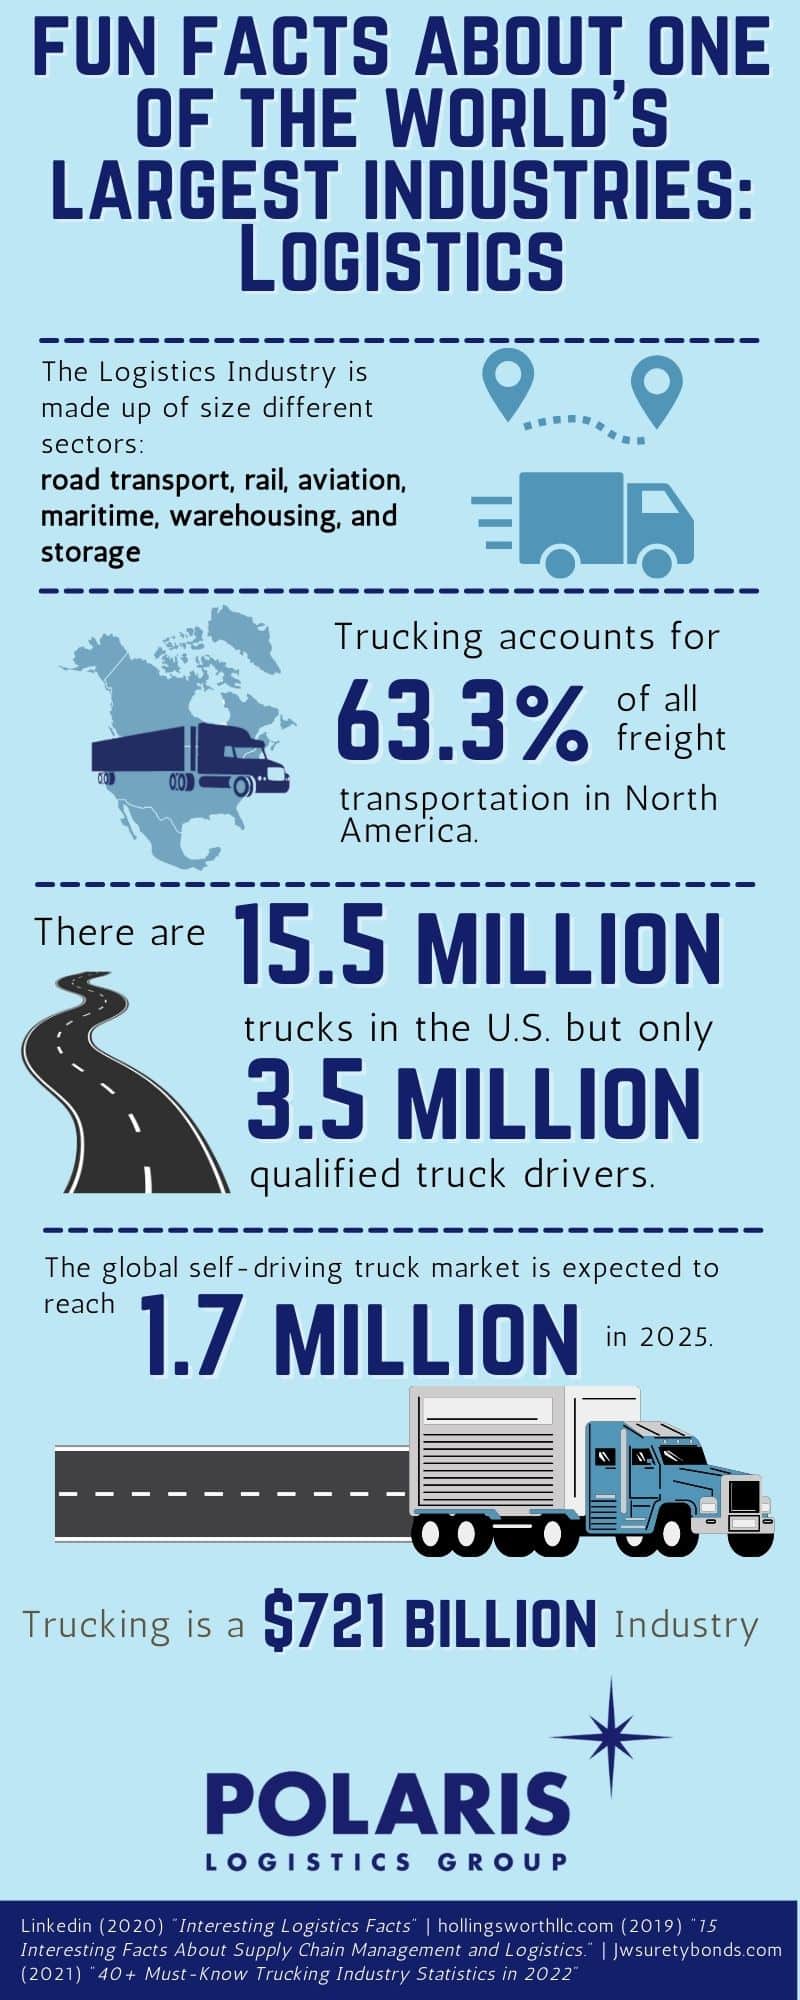 fun facts about one of the world's largest industries: Logistics